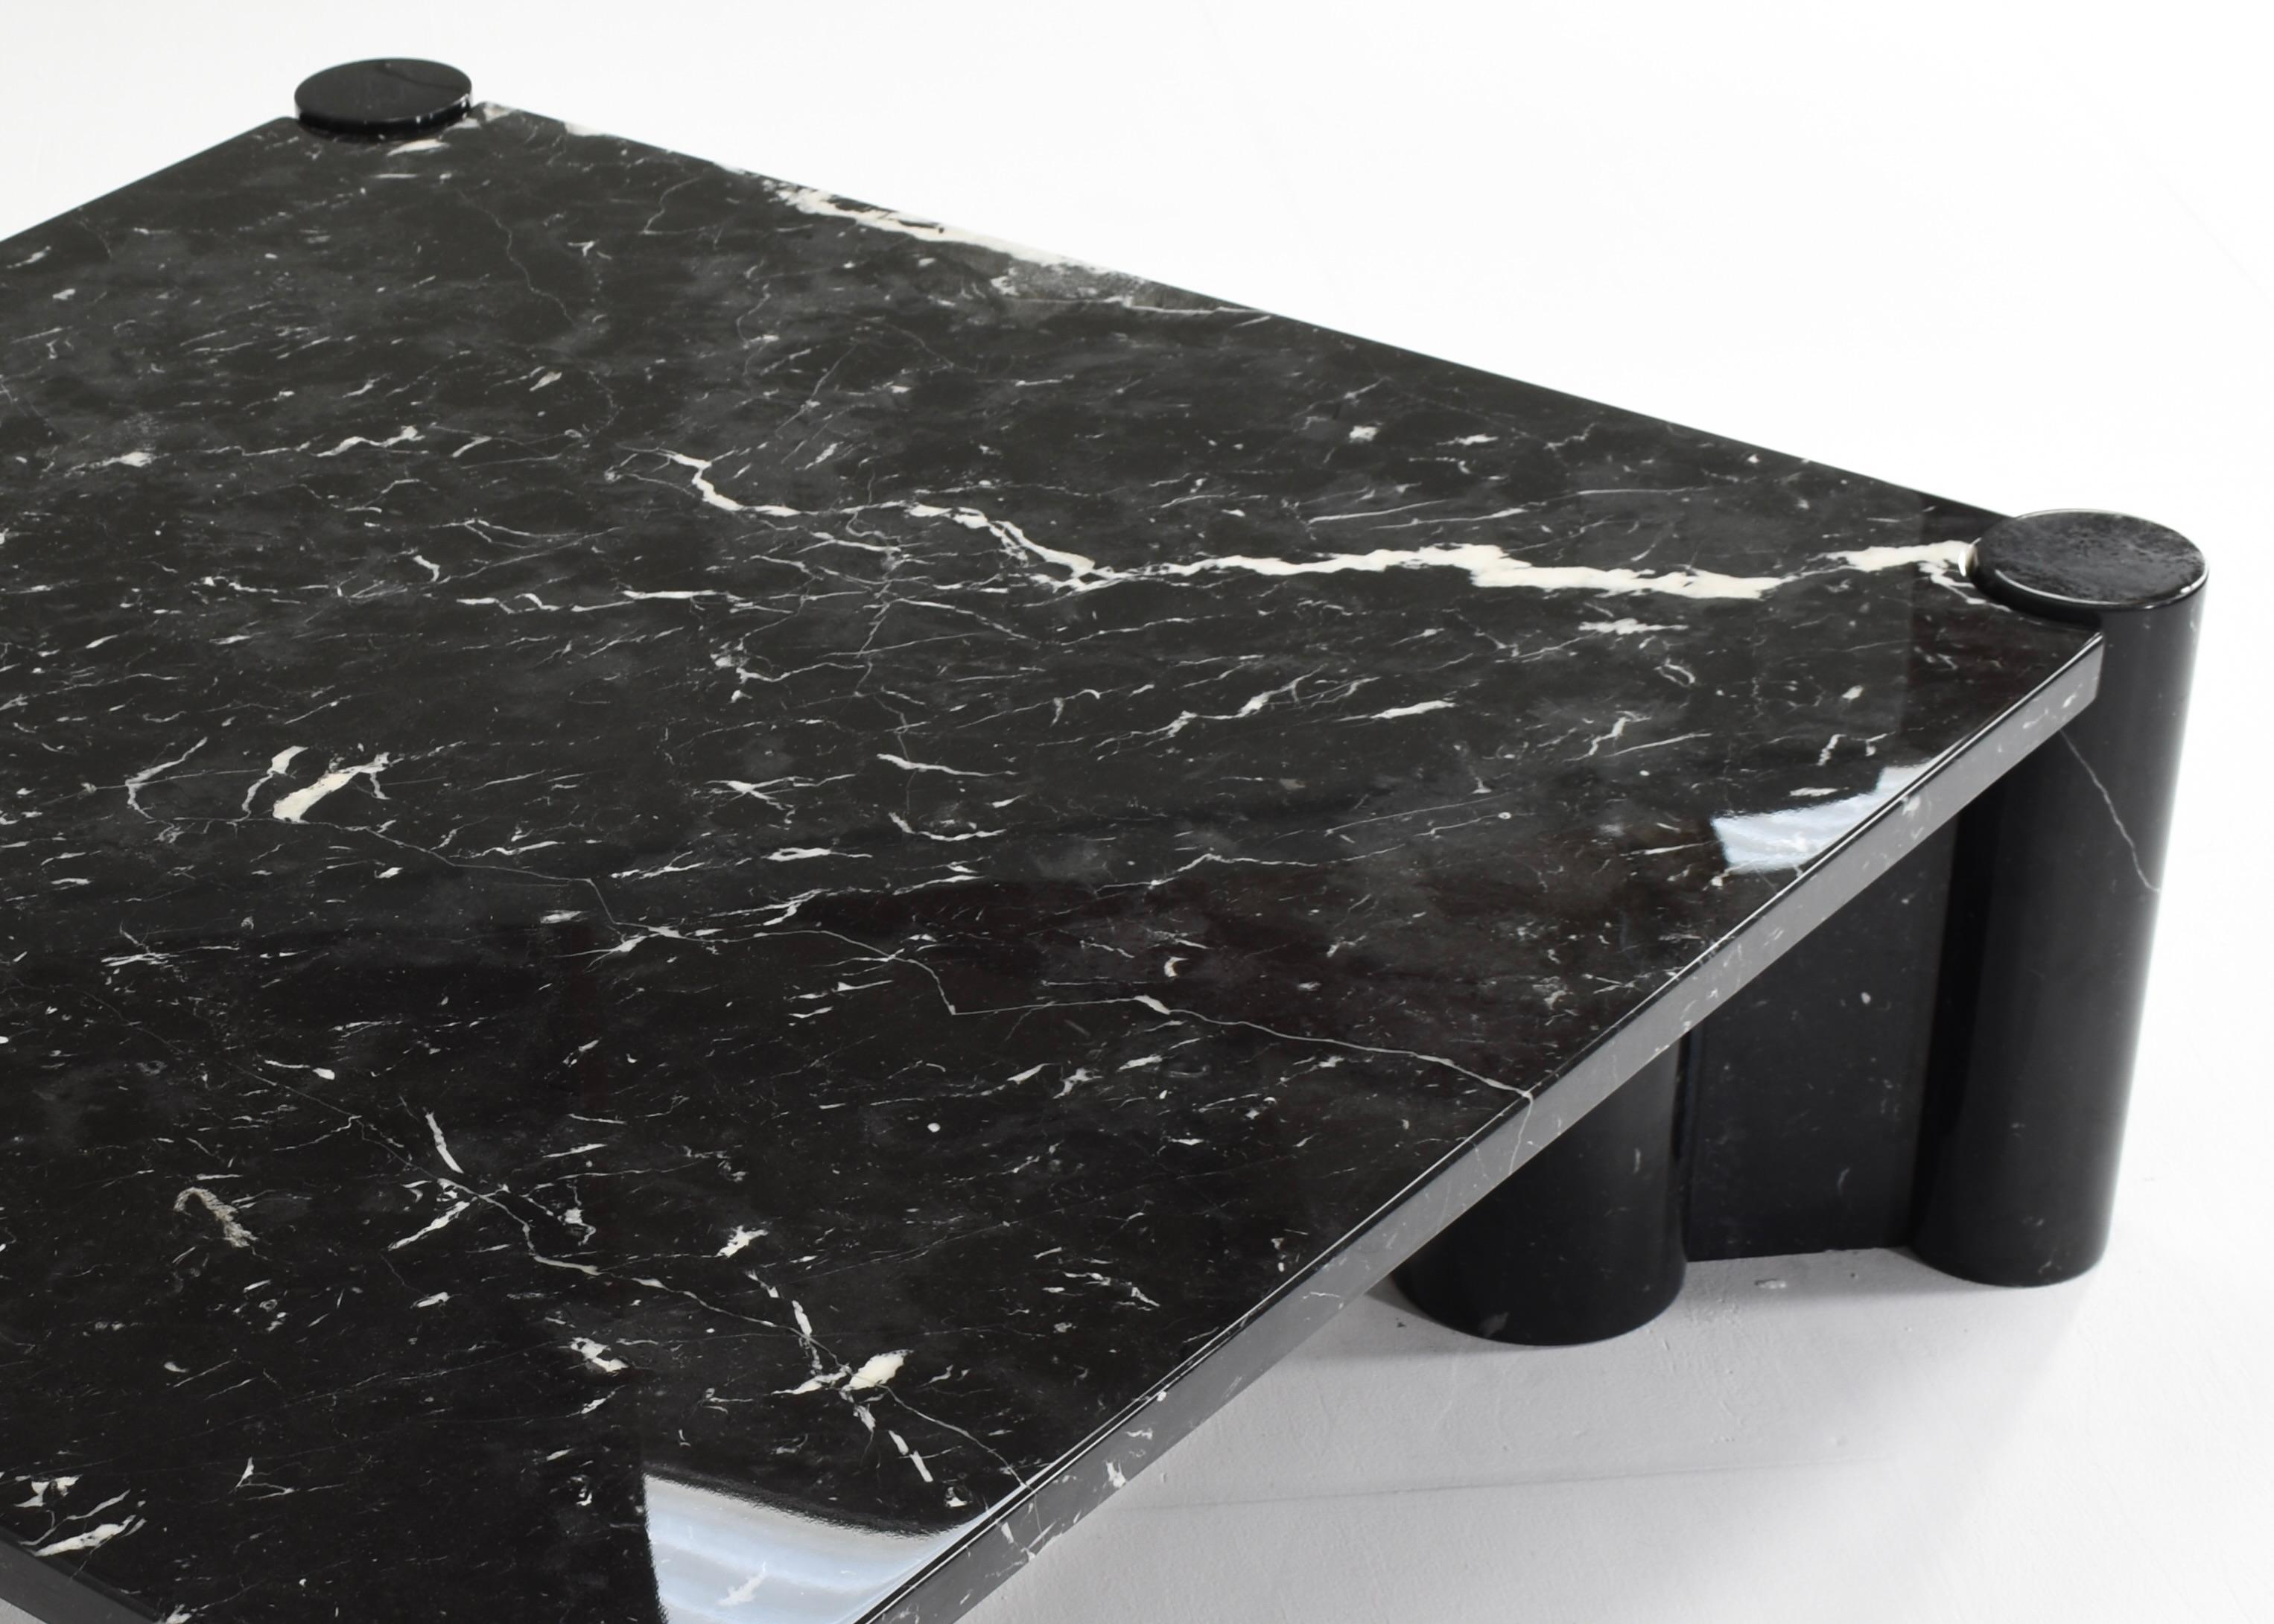 Gae Aulenti for Knoll ‘Jumbo’ Coffee Table in Nero Marquina Black Marble, Italy  9